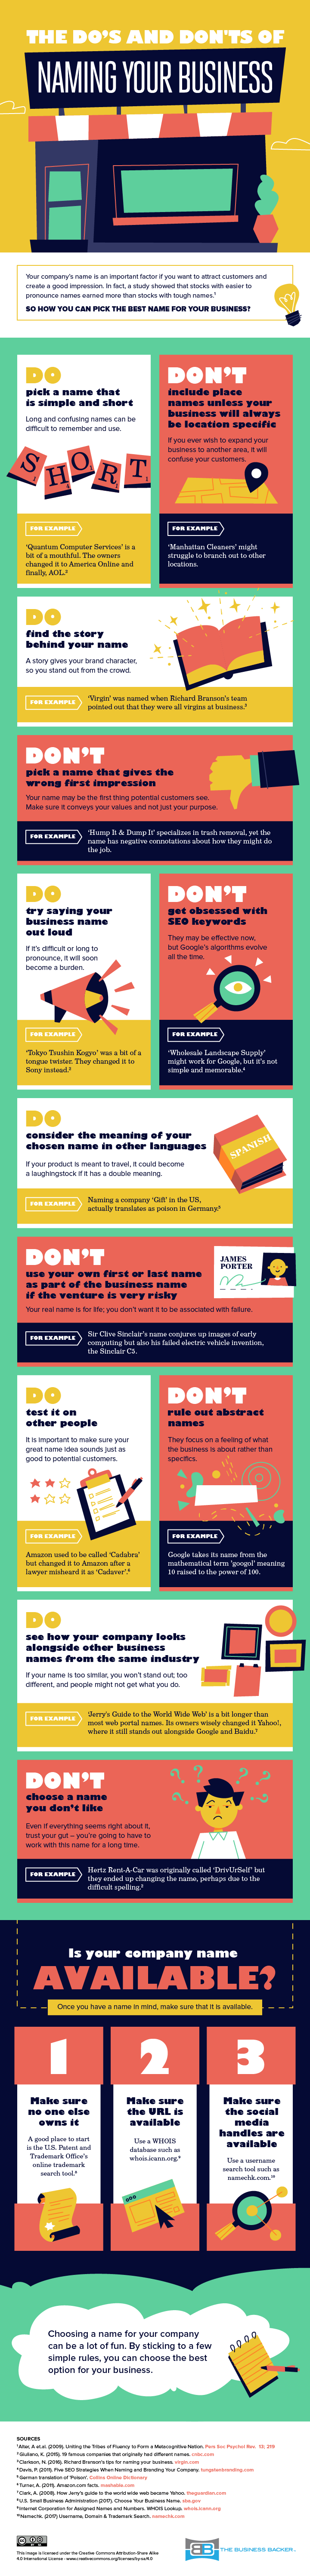 The Do’s and Don'ts of Naming Your Business (Infographic)